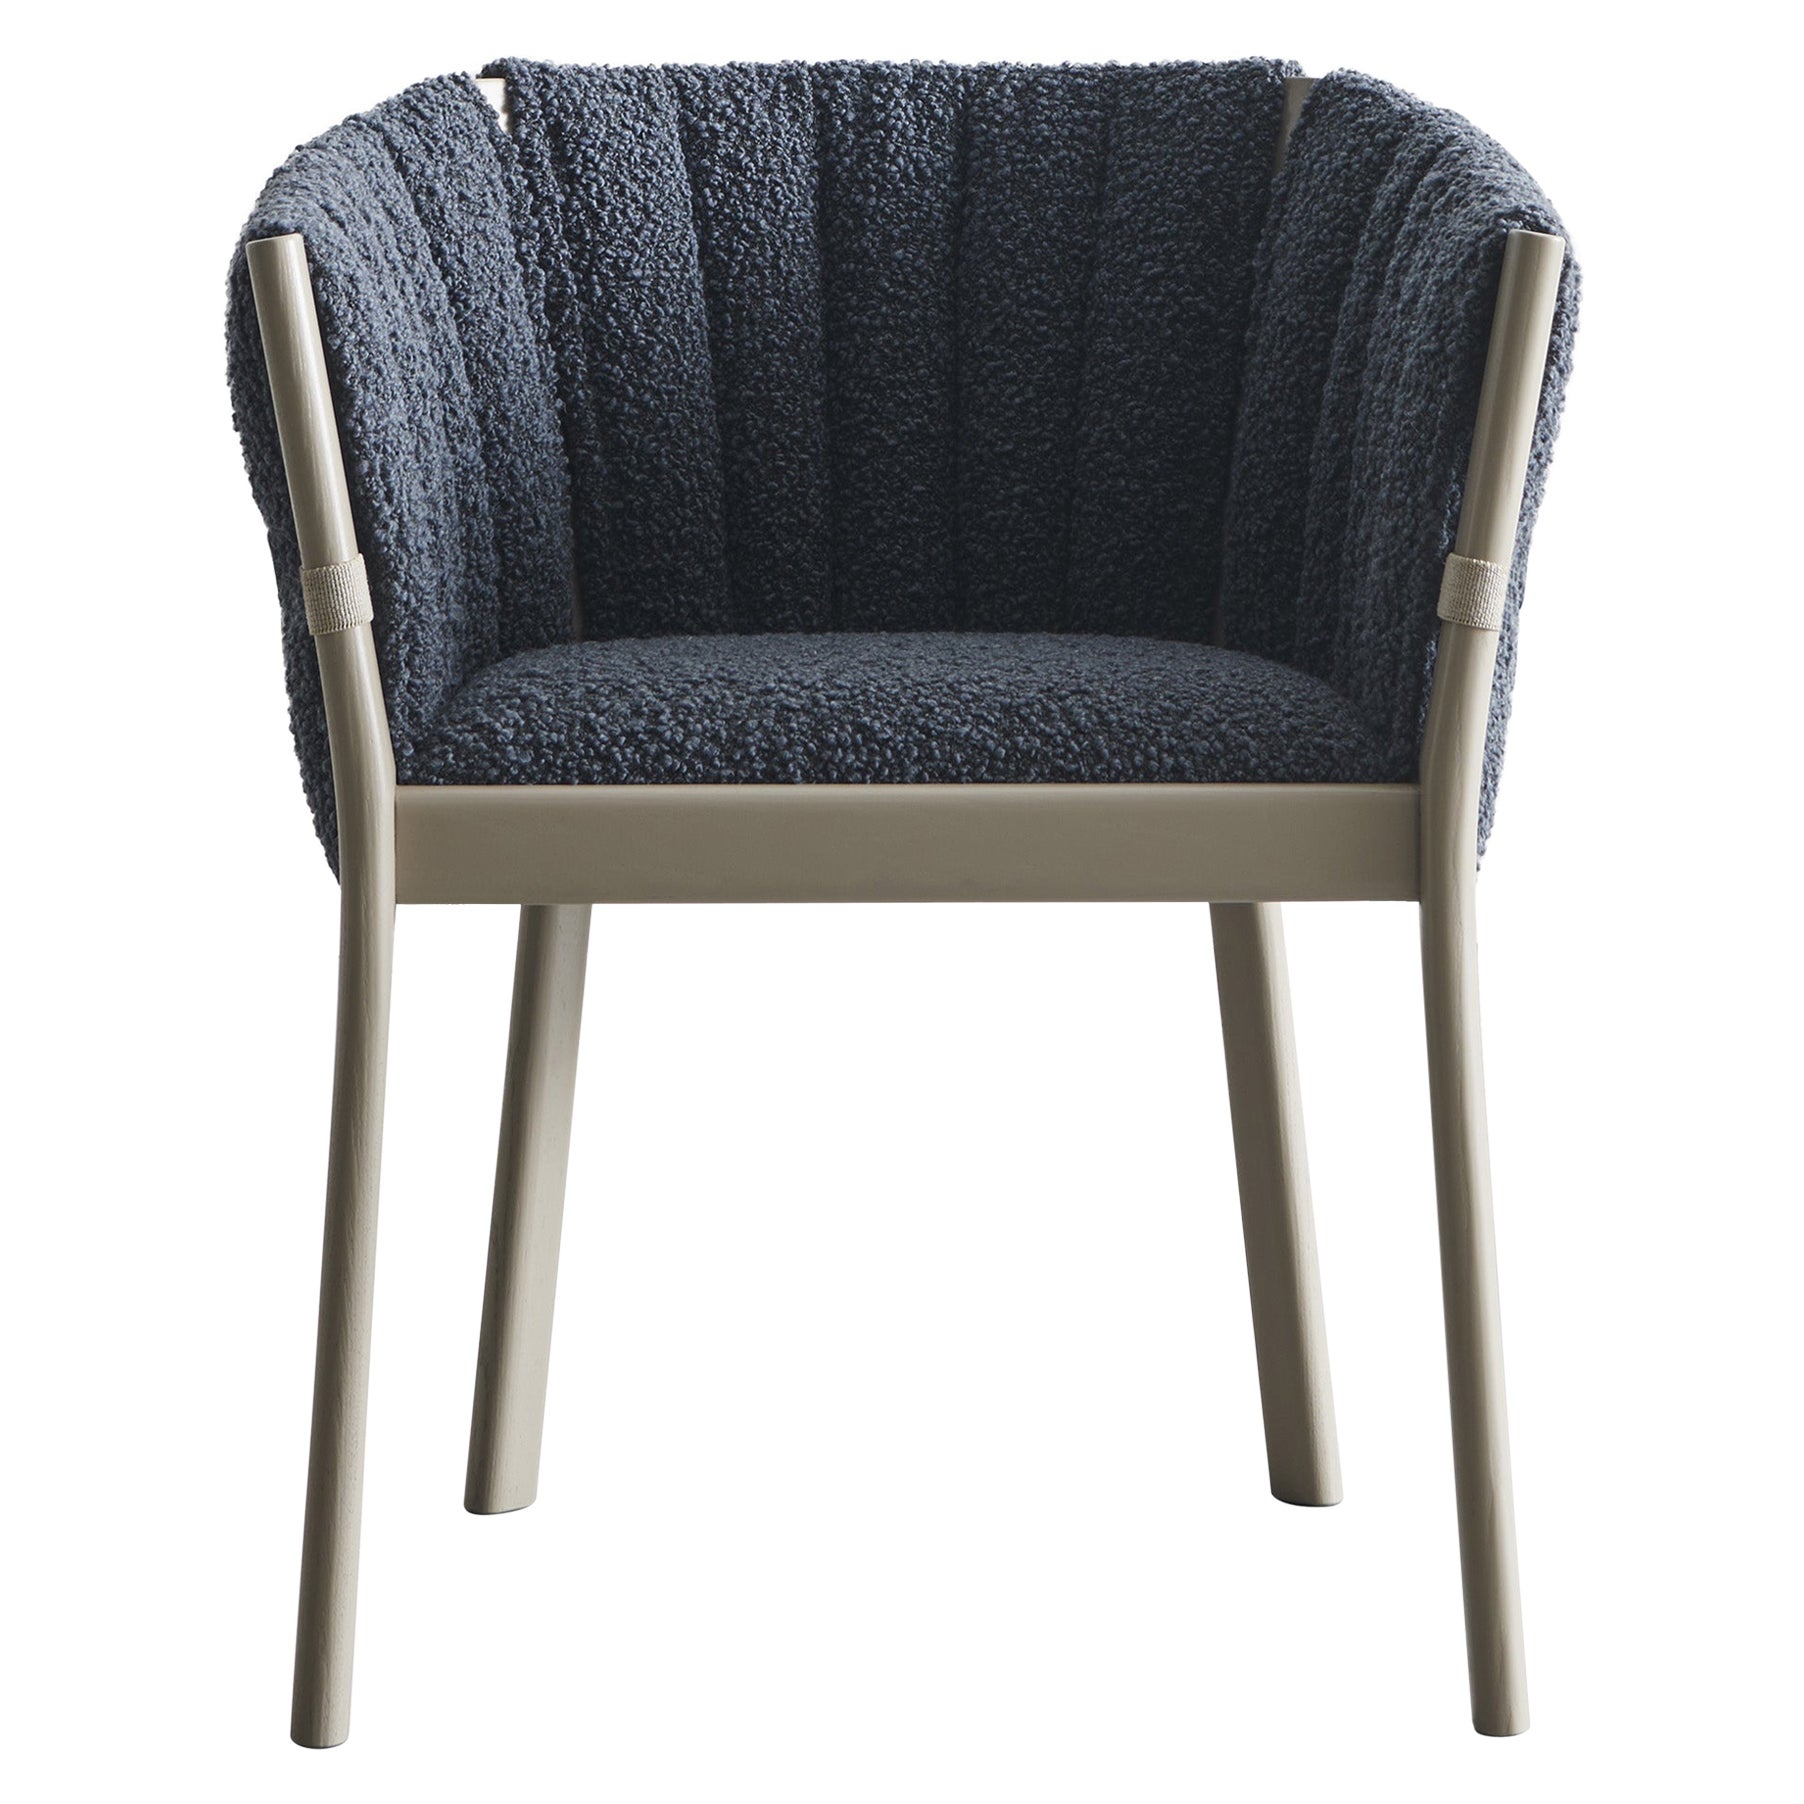 Gervasoni Yelek Chair in Ash Wood with Laquered Frame by Federica Biasi For Sale